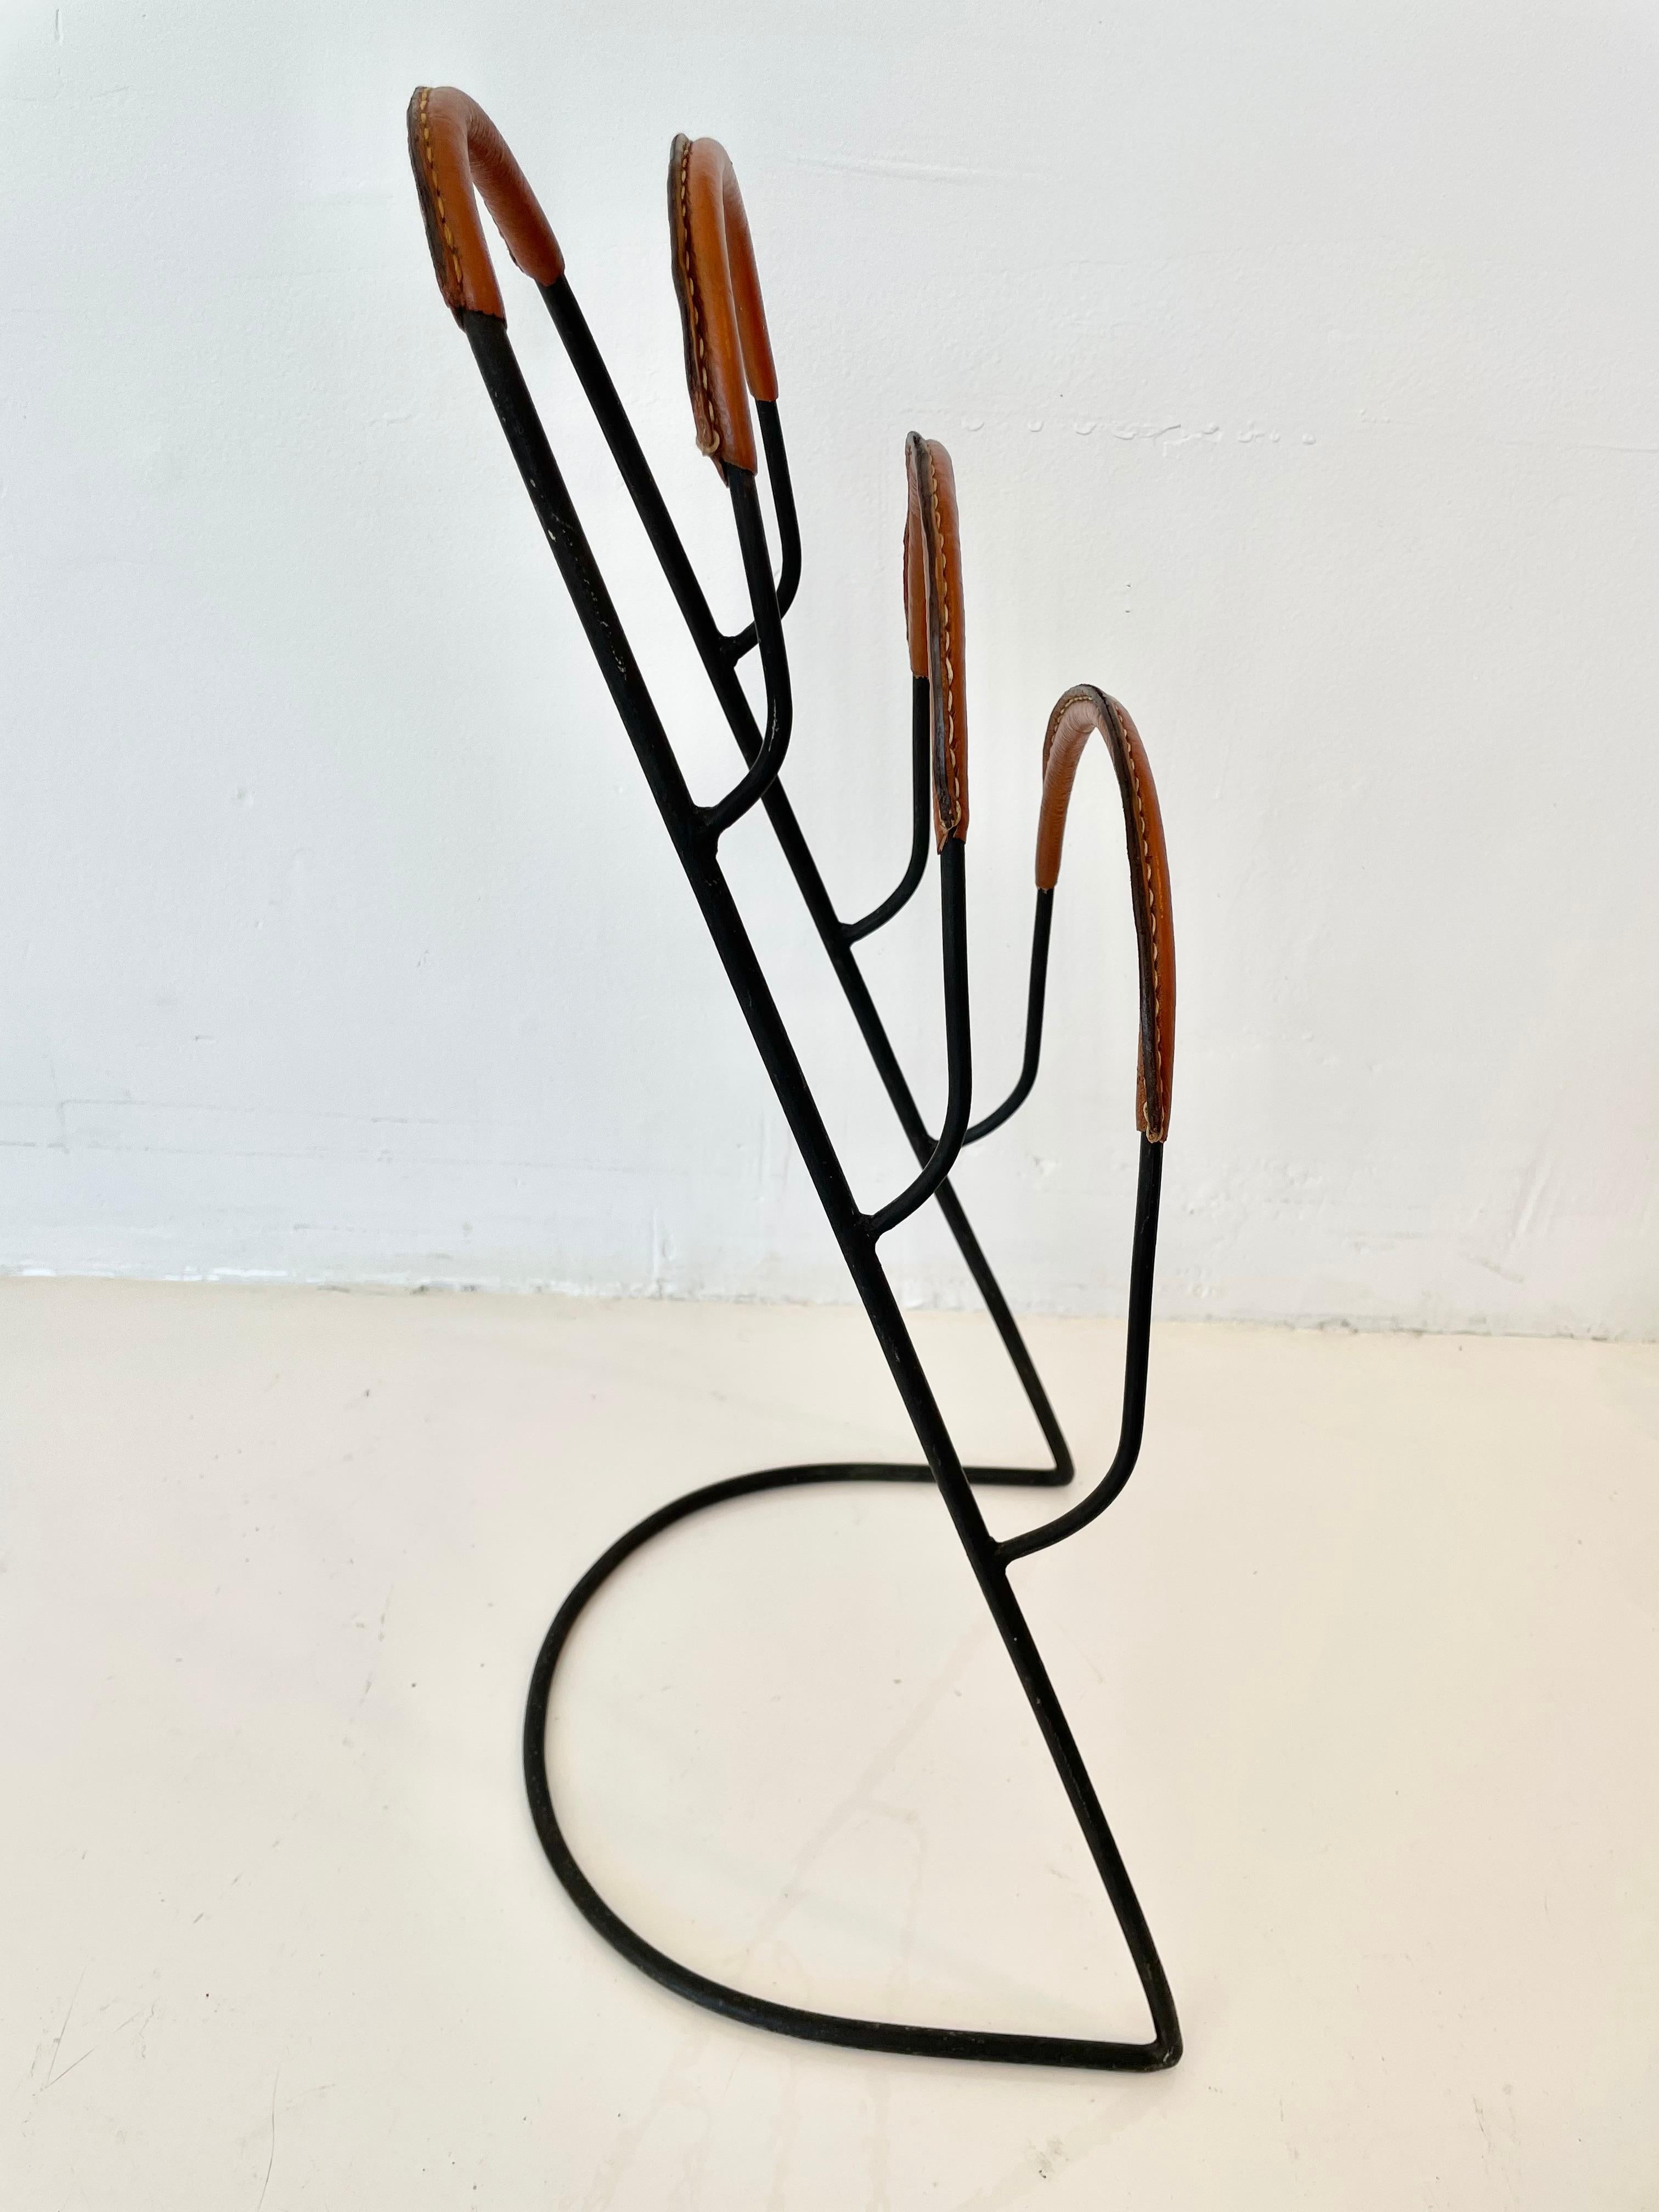 Very unusual vertical magazine rack by French designer Jacques Adnet. Iron frame with leather wrapped handle and trays. Three angled metal trays to hold magazines or books. Great sculptural piece and excellent example of collectible Adnet design.